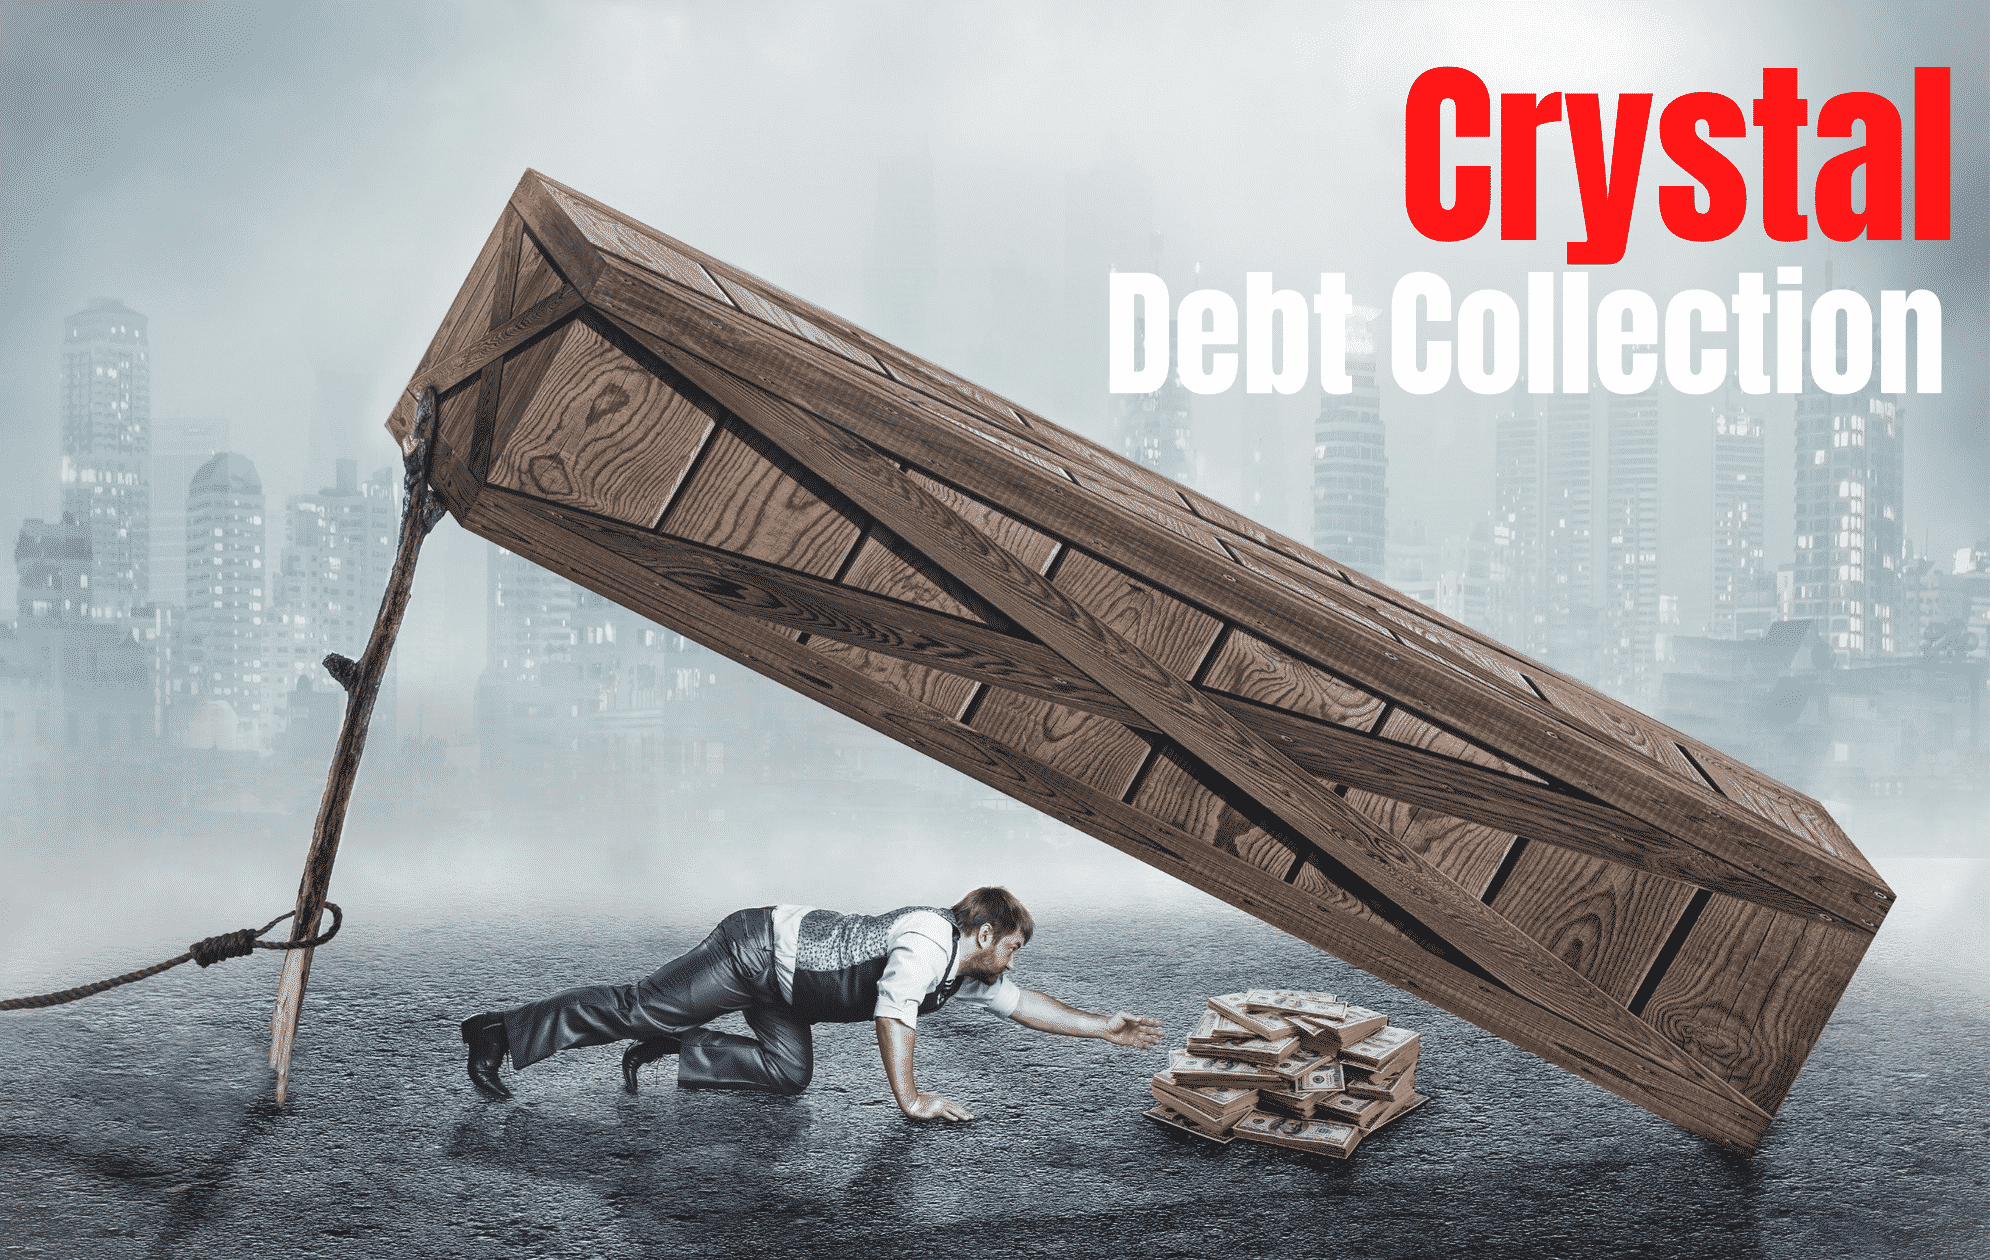 crystal-debt-collection